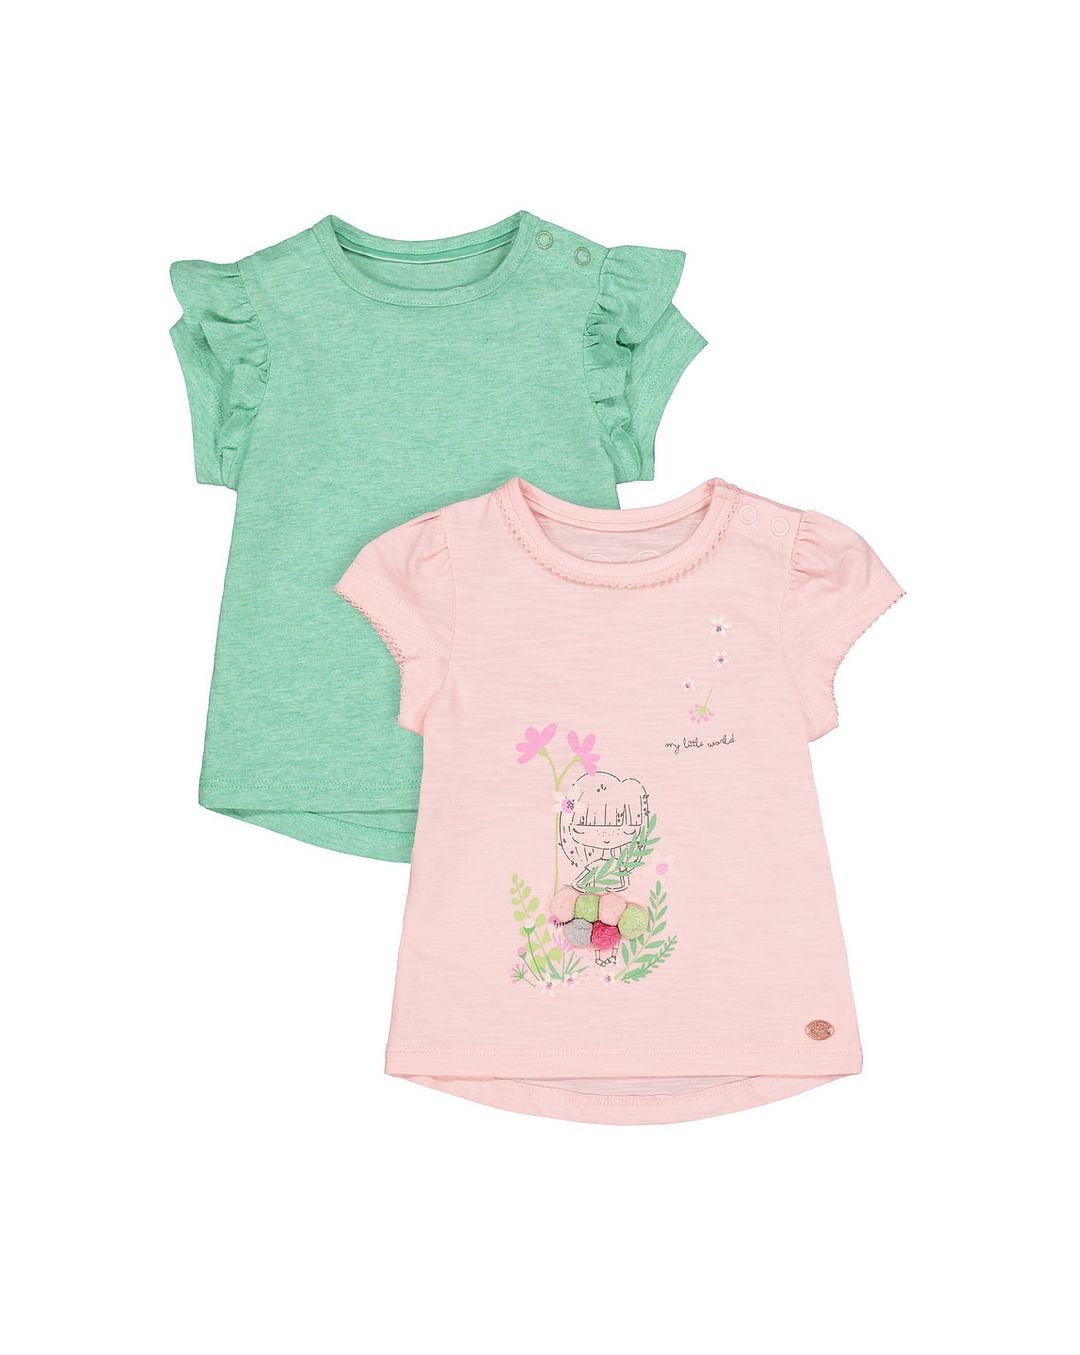 Mothercare | Green & Pink Printed Top - Pack of 2